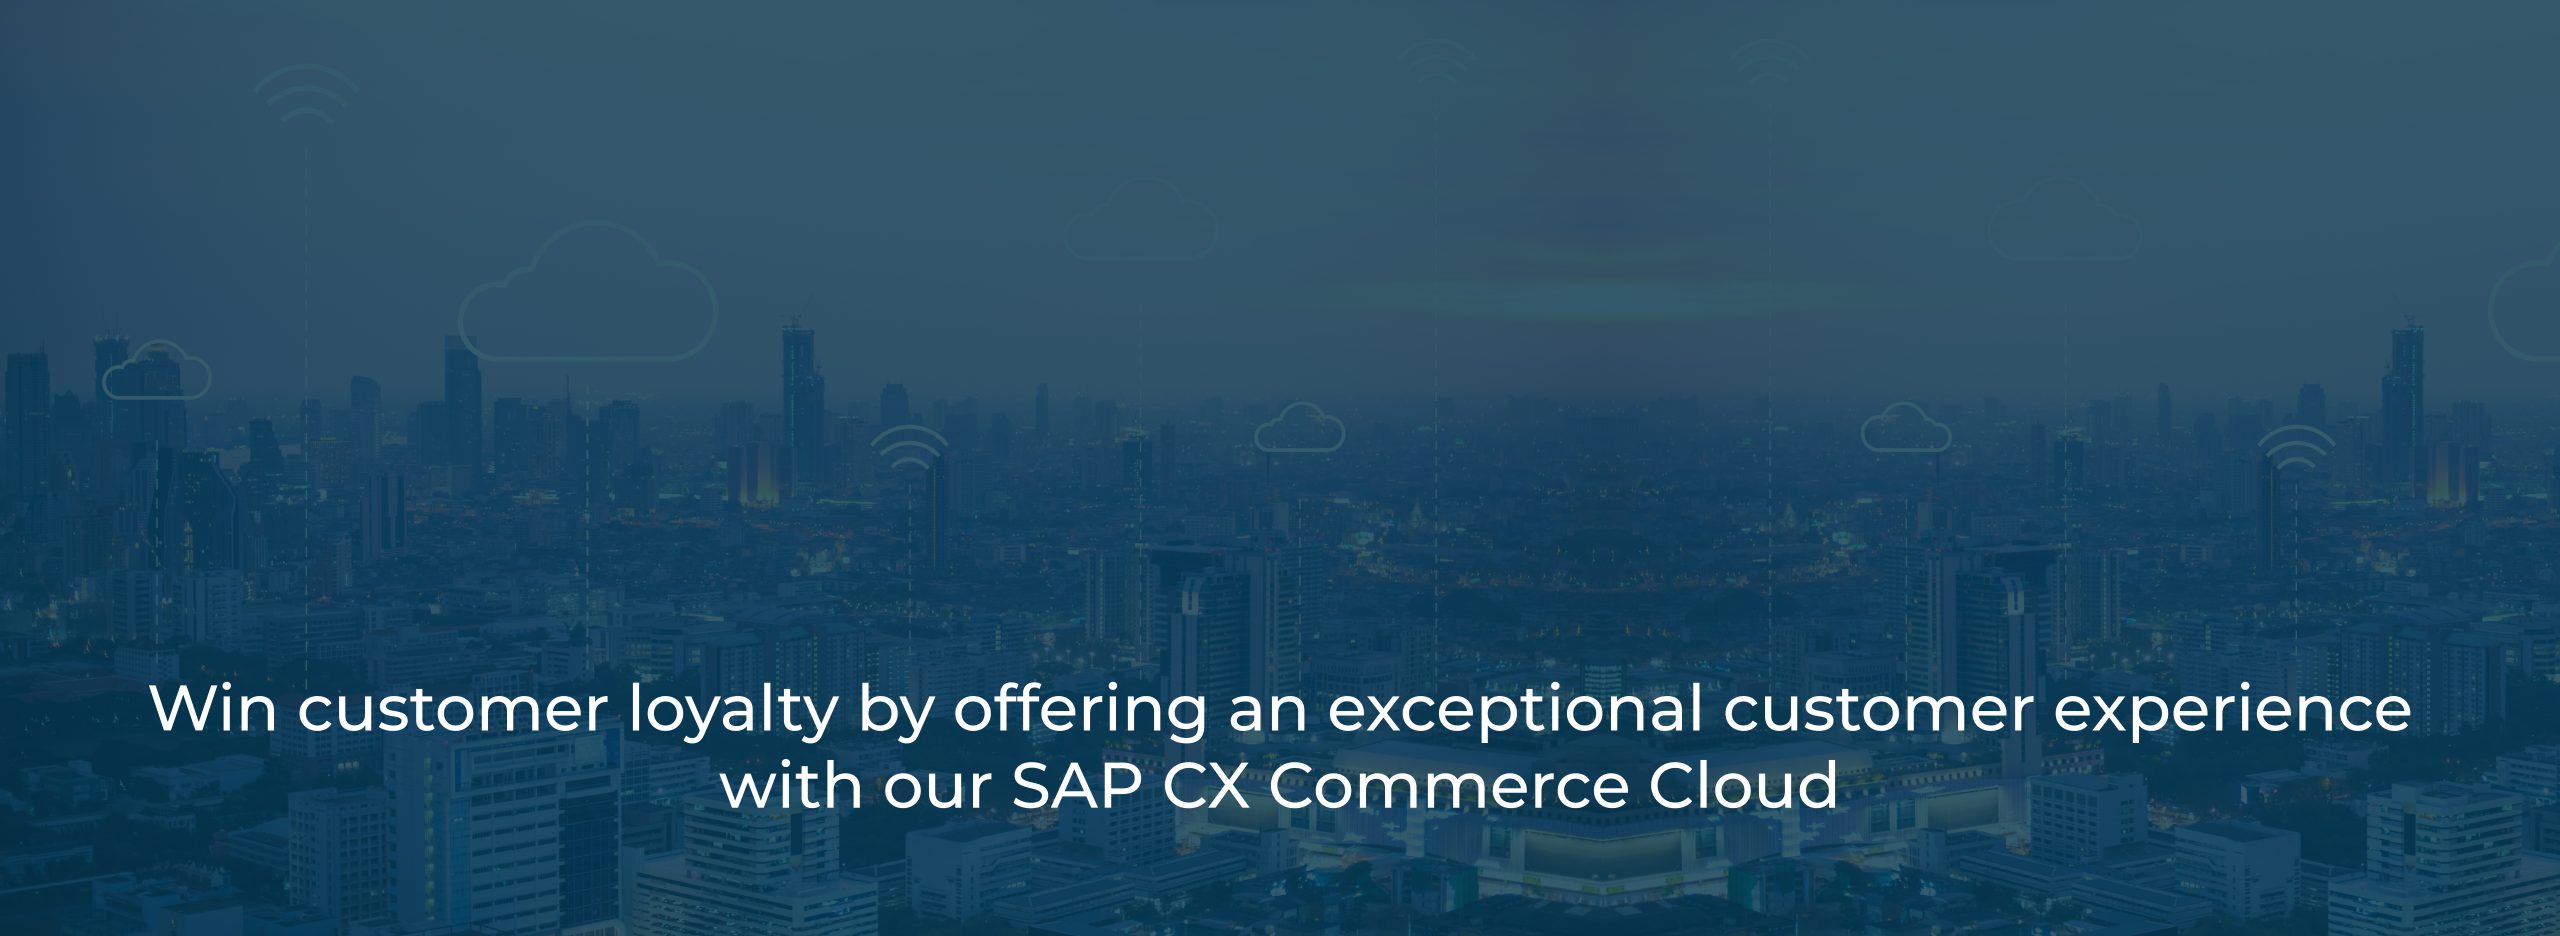 Win customer loyalty by offering an exceptional customer experience with our SAP CX Commerce Cloud